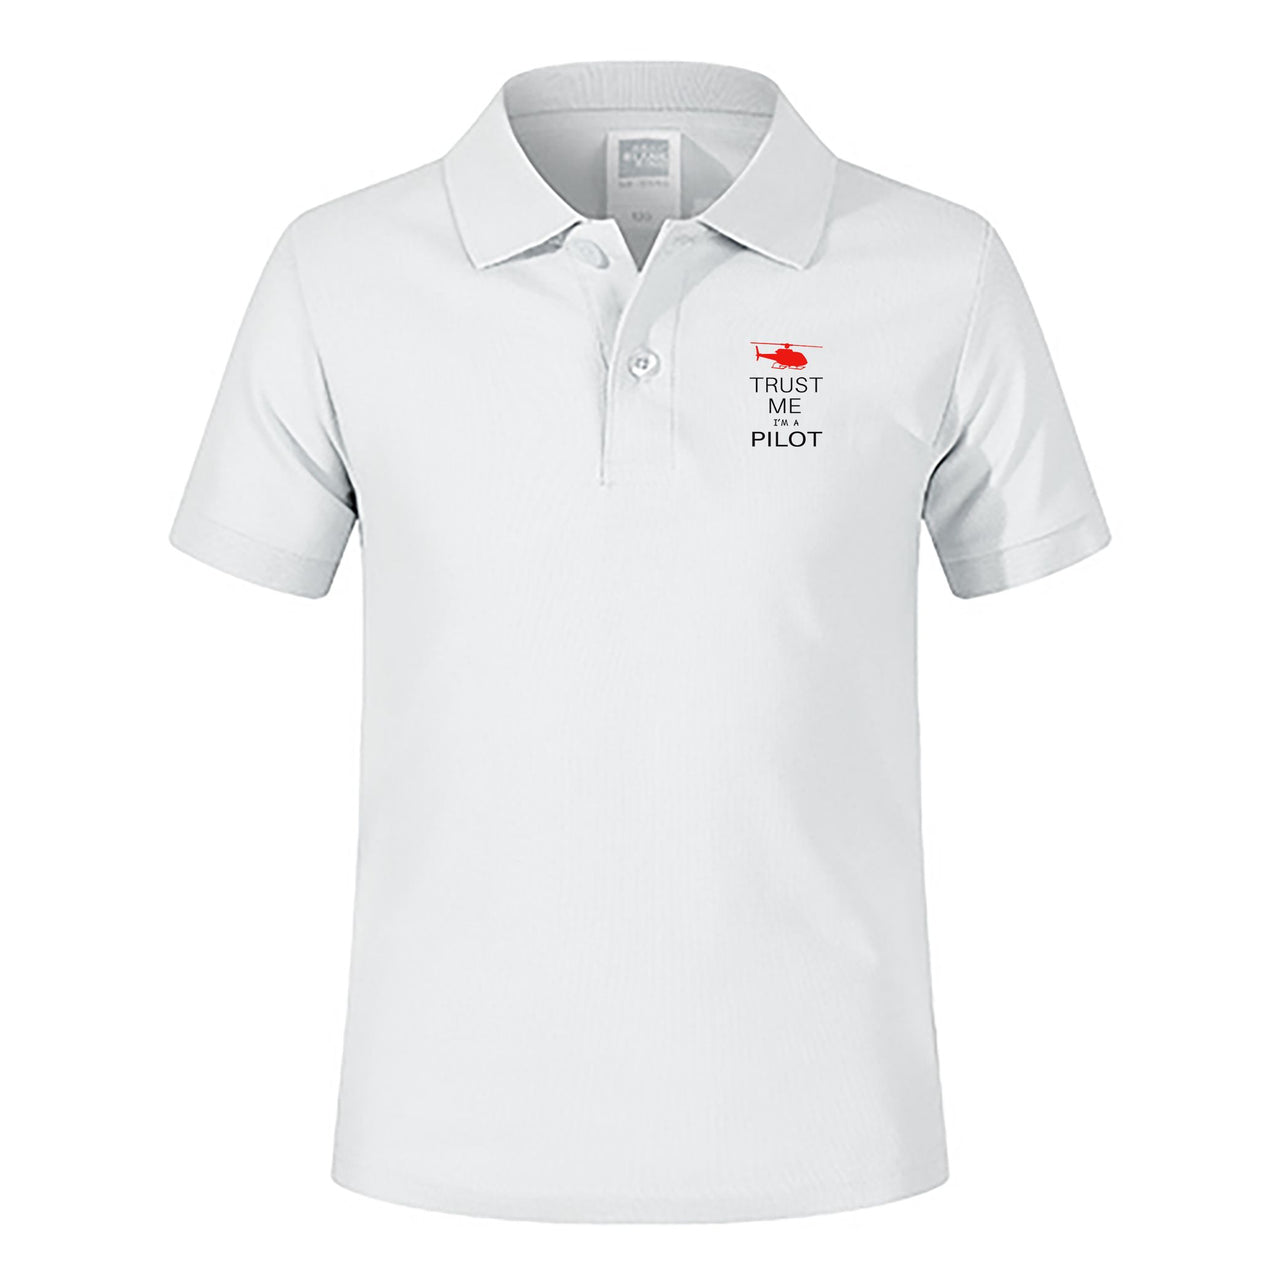 Trust Me I'm a Pilot (Helicopter) Designed Children Polo T-Shirts